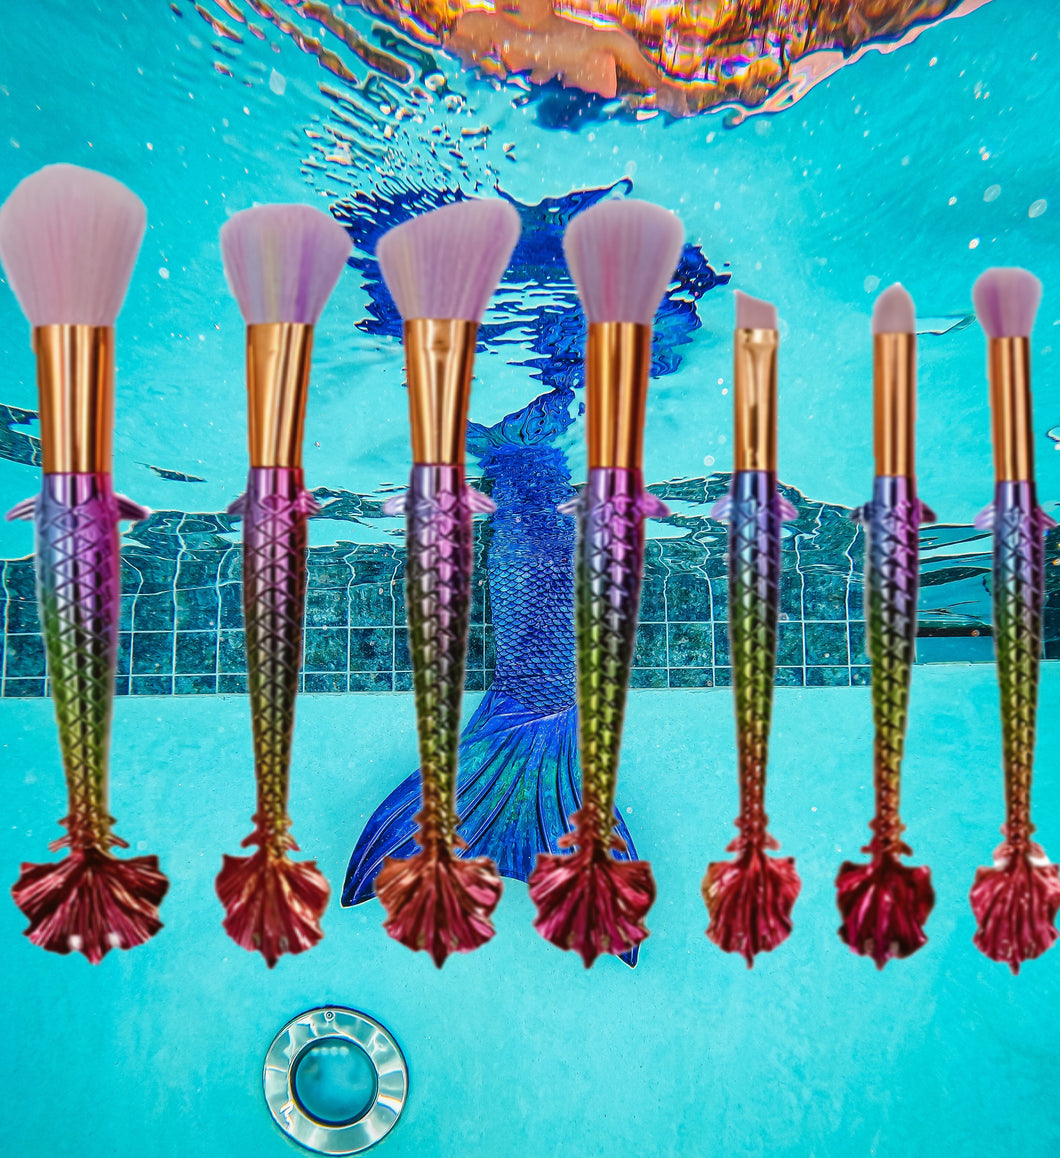 Glamza 7pc Mermaid Makeup Brush Sets - Wide Fin and Big Fin